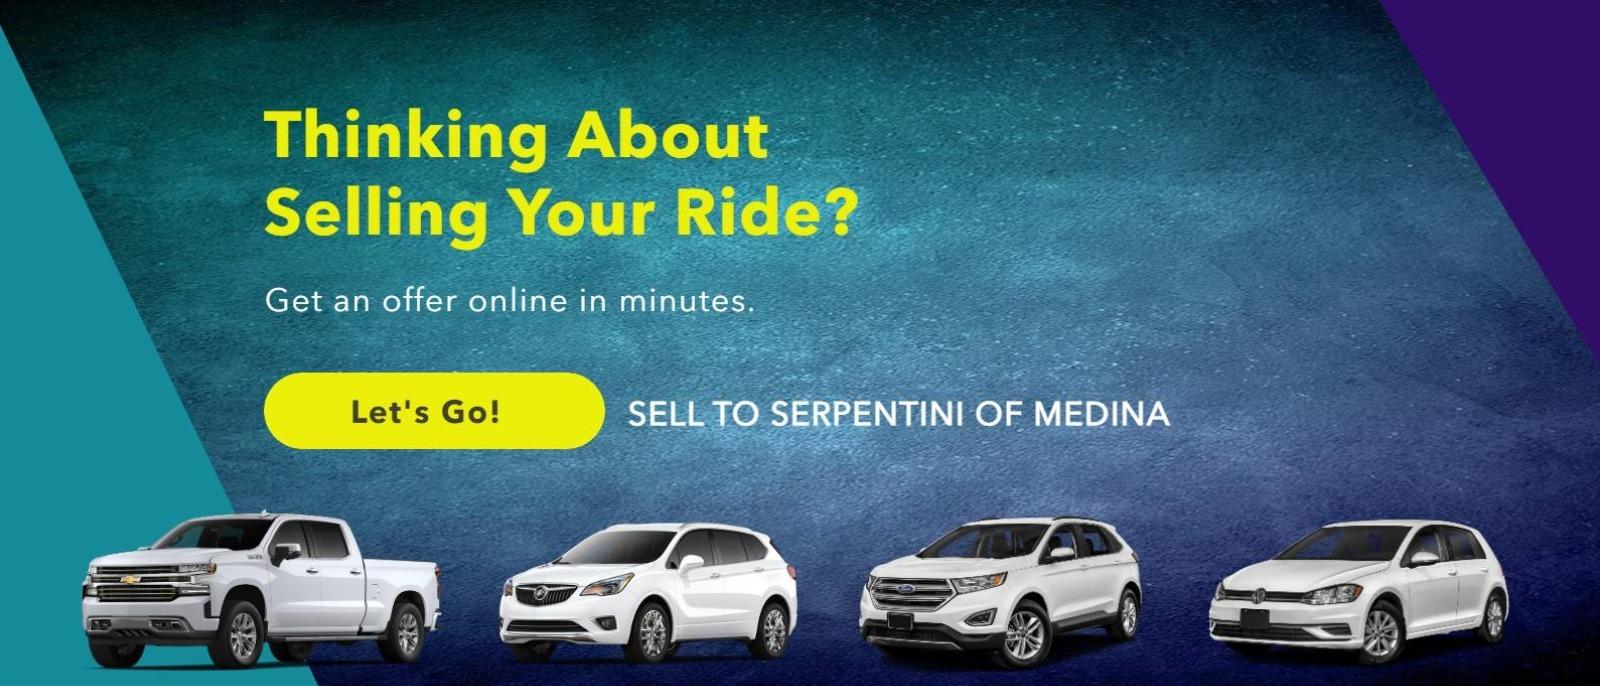 Thin king about selling your ride?  Get an online offer in minutes.  Let's Go!  Sell to Serpentini of Medina!